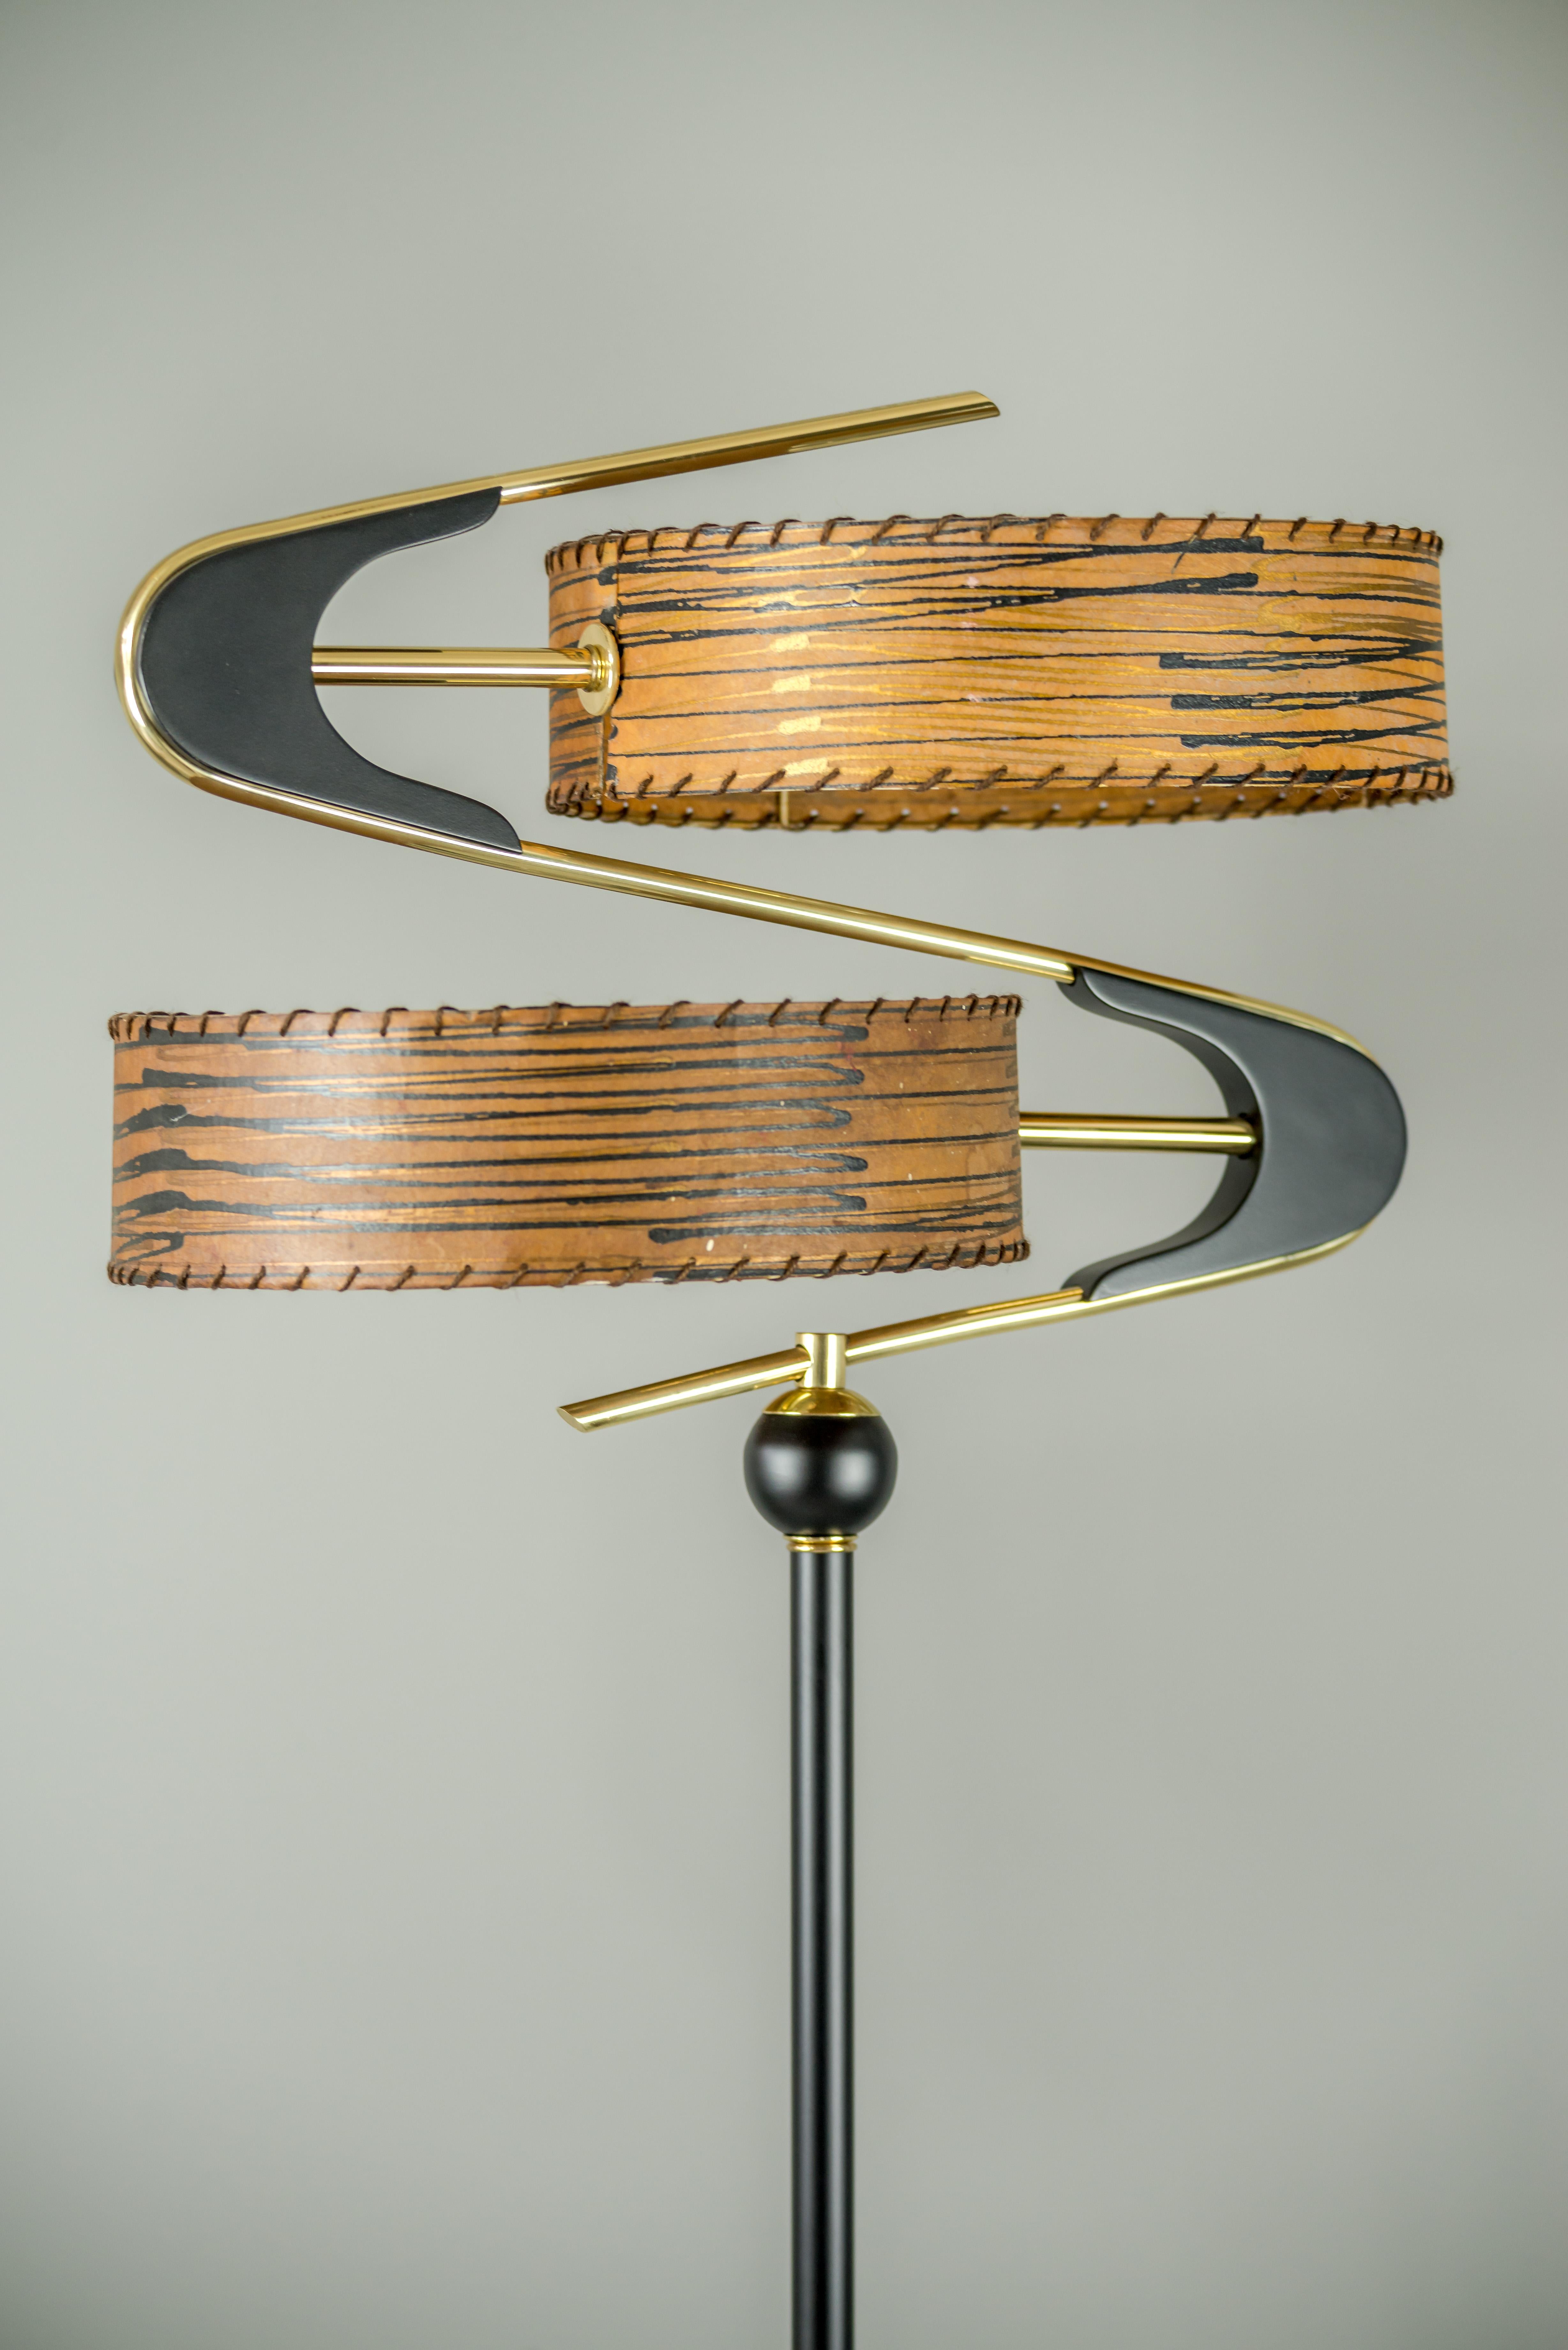 Very beautiful floor lamp, Italy, 1950s
Blackened brass
Original shades ( painted )
Brass parts polished and stove enameled.